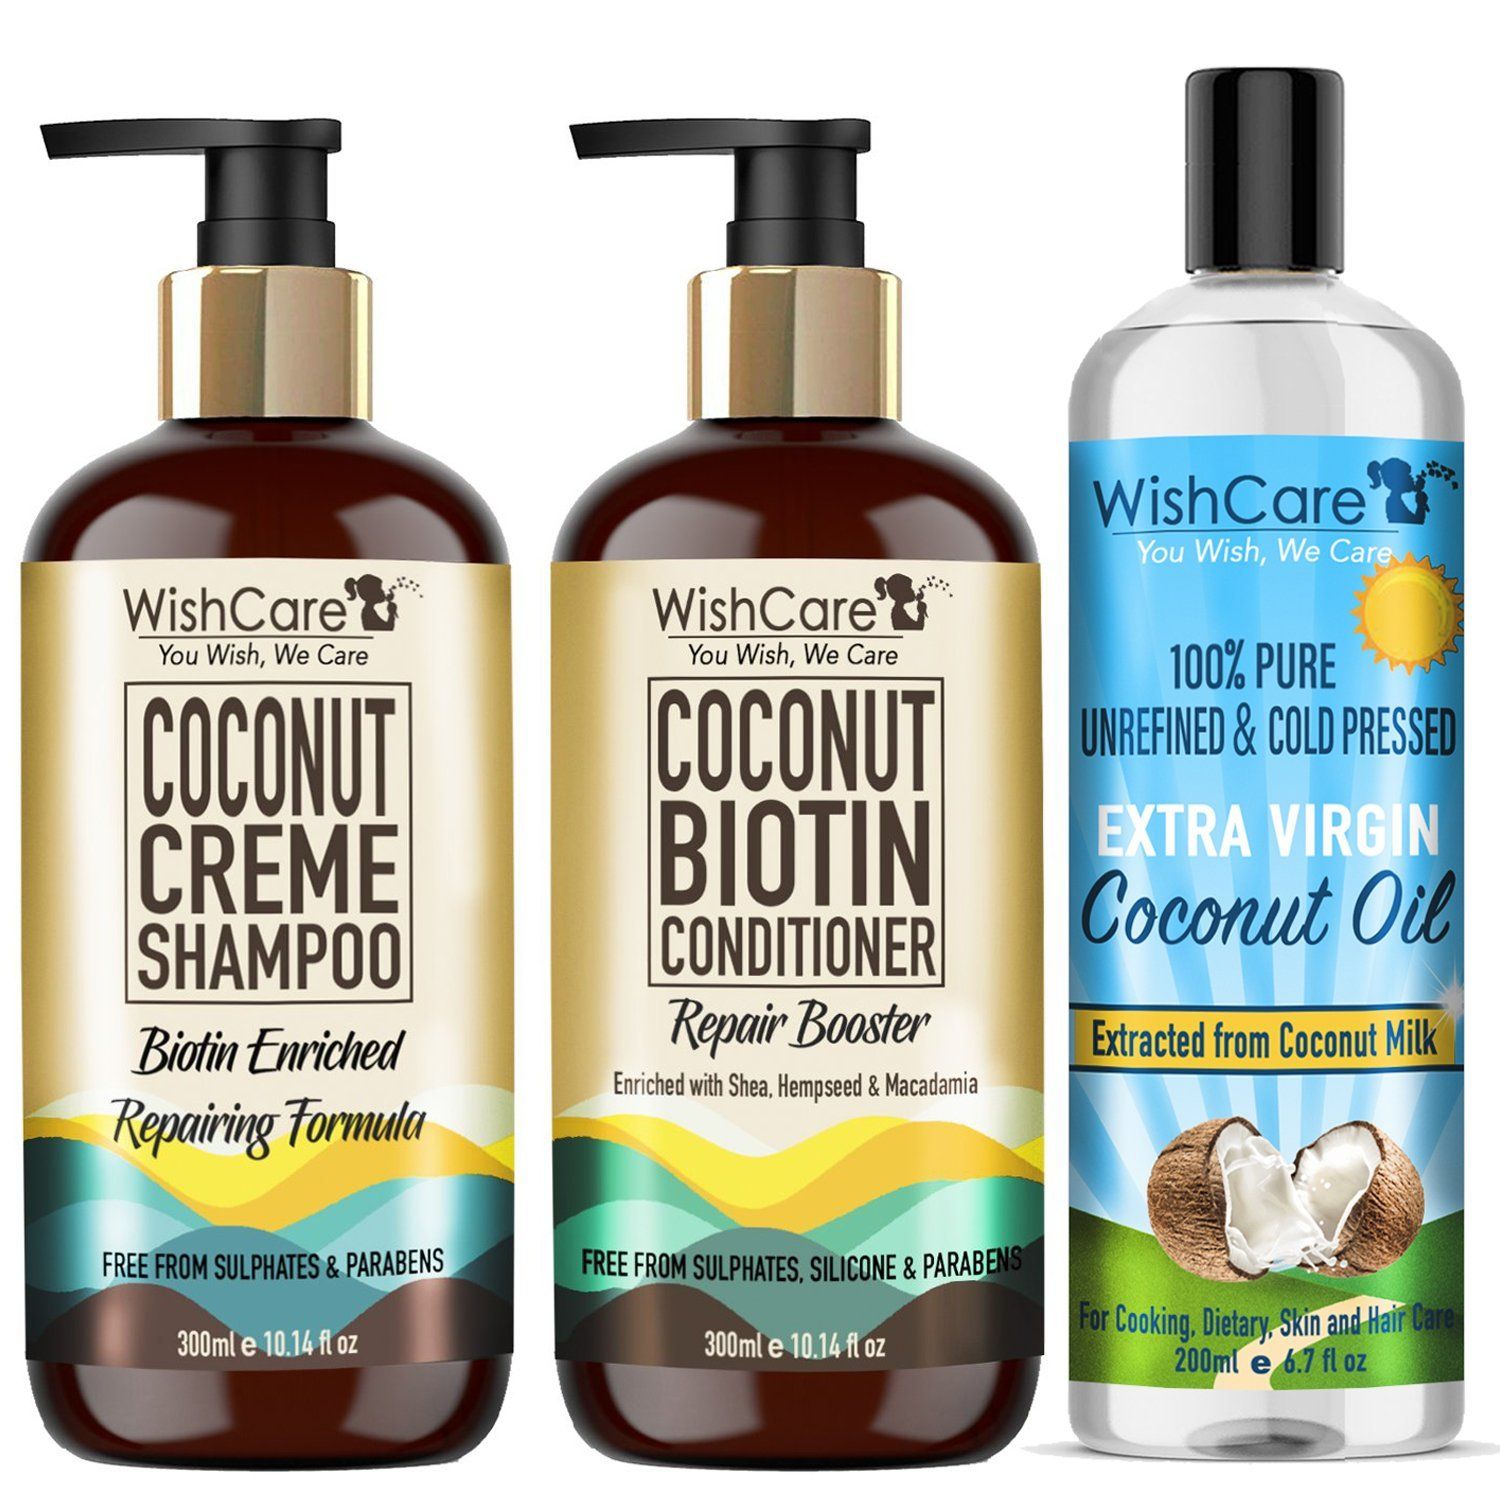 WishCare Coconut Biotin Hair Combo- Paraben And Sulphate Free Shampoo, Conditioner & Coconut Oil